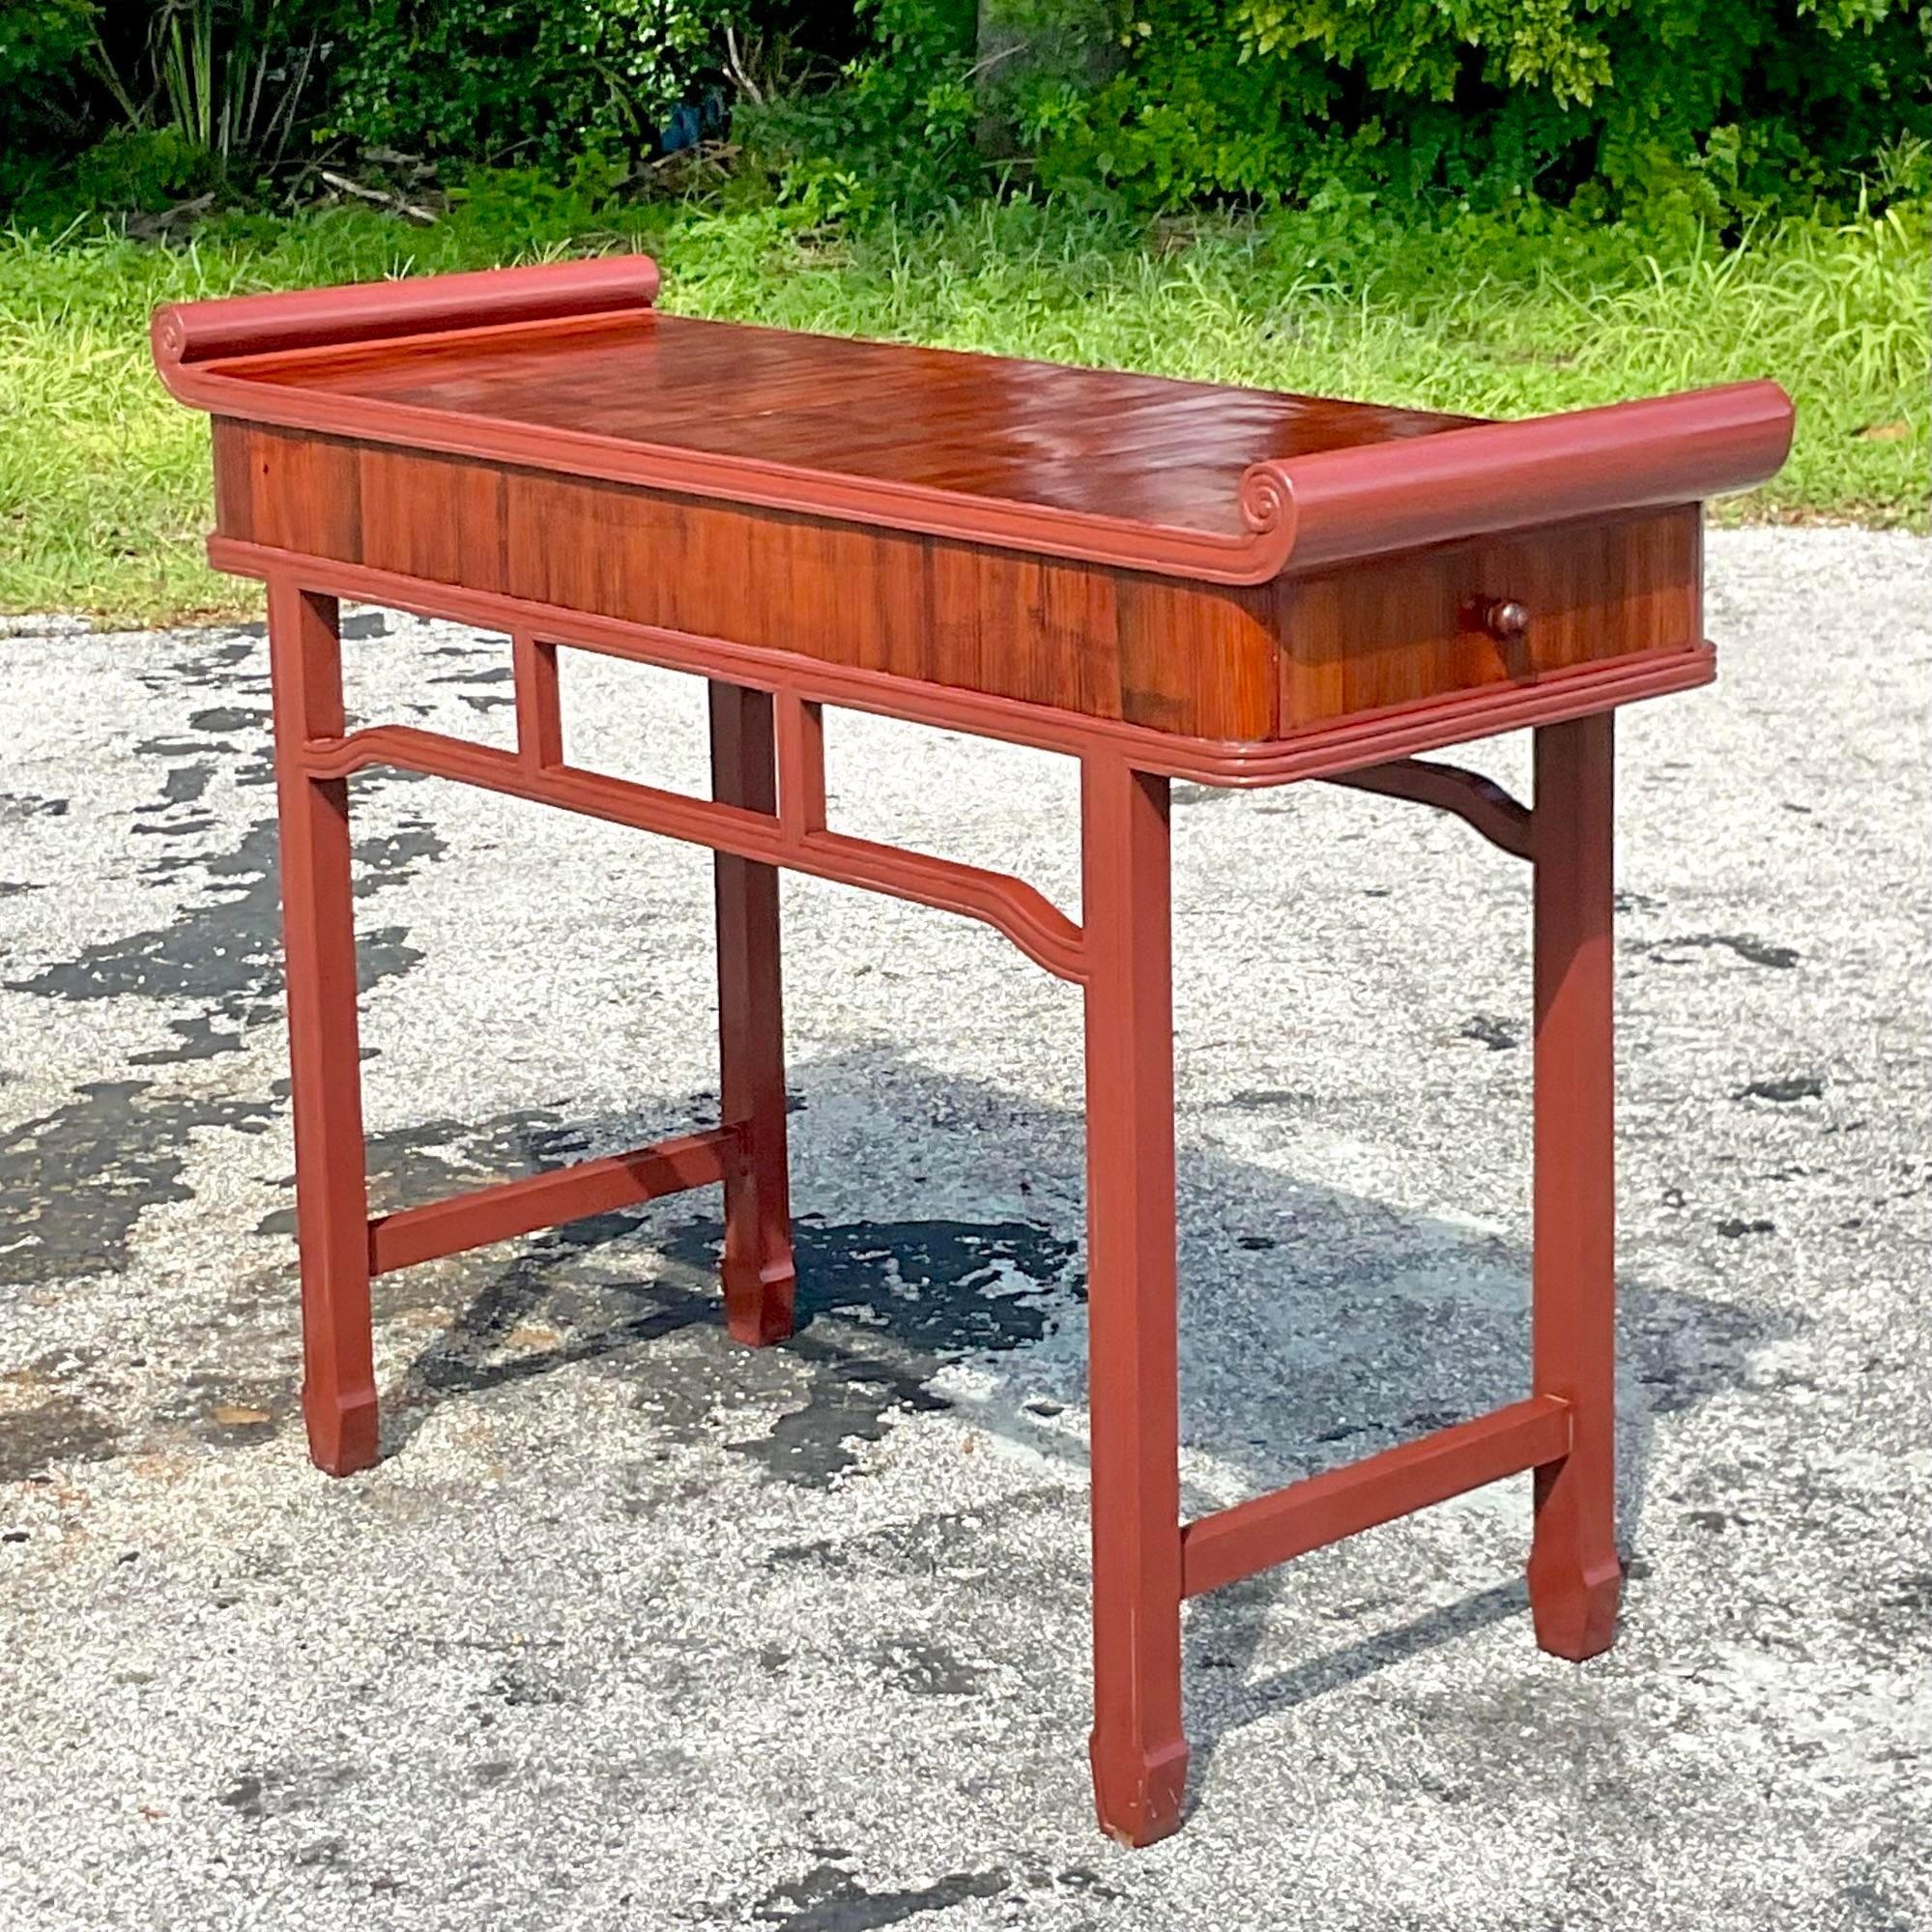 A fabulous vintage Boho console table. A chic Pagoda style with a reclaimed wood frame. A deep wine color in a gloss finish. Taller than usual for extra drama. Acquired from a Palm Beach estate.